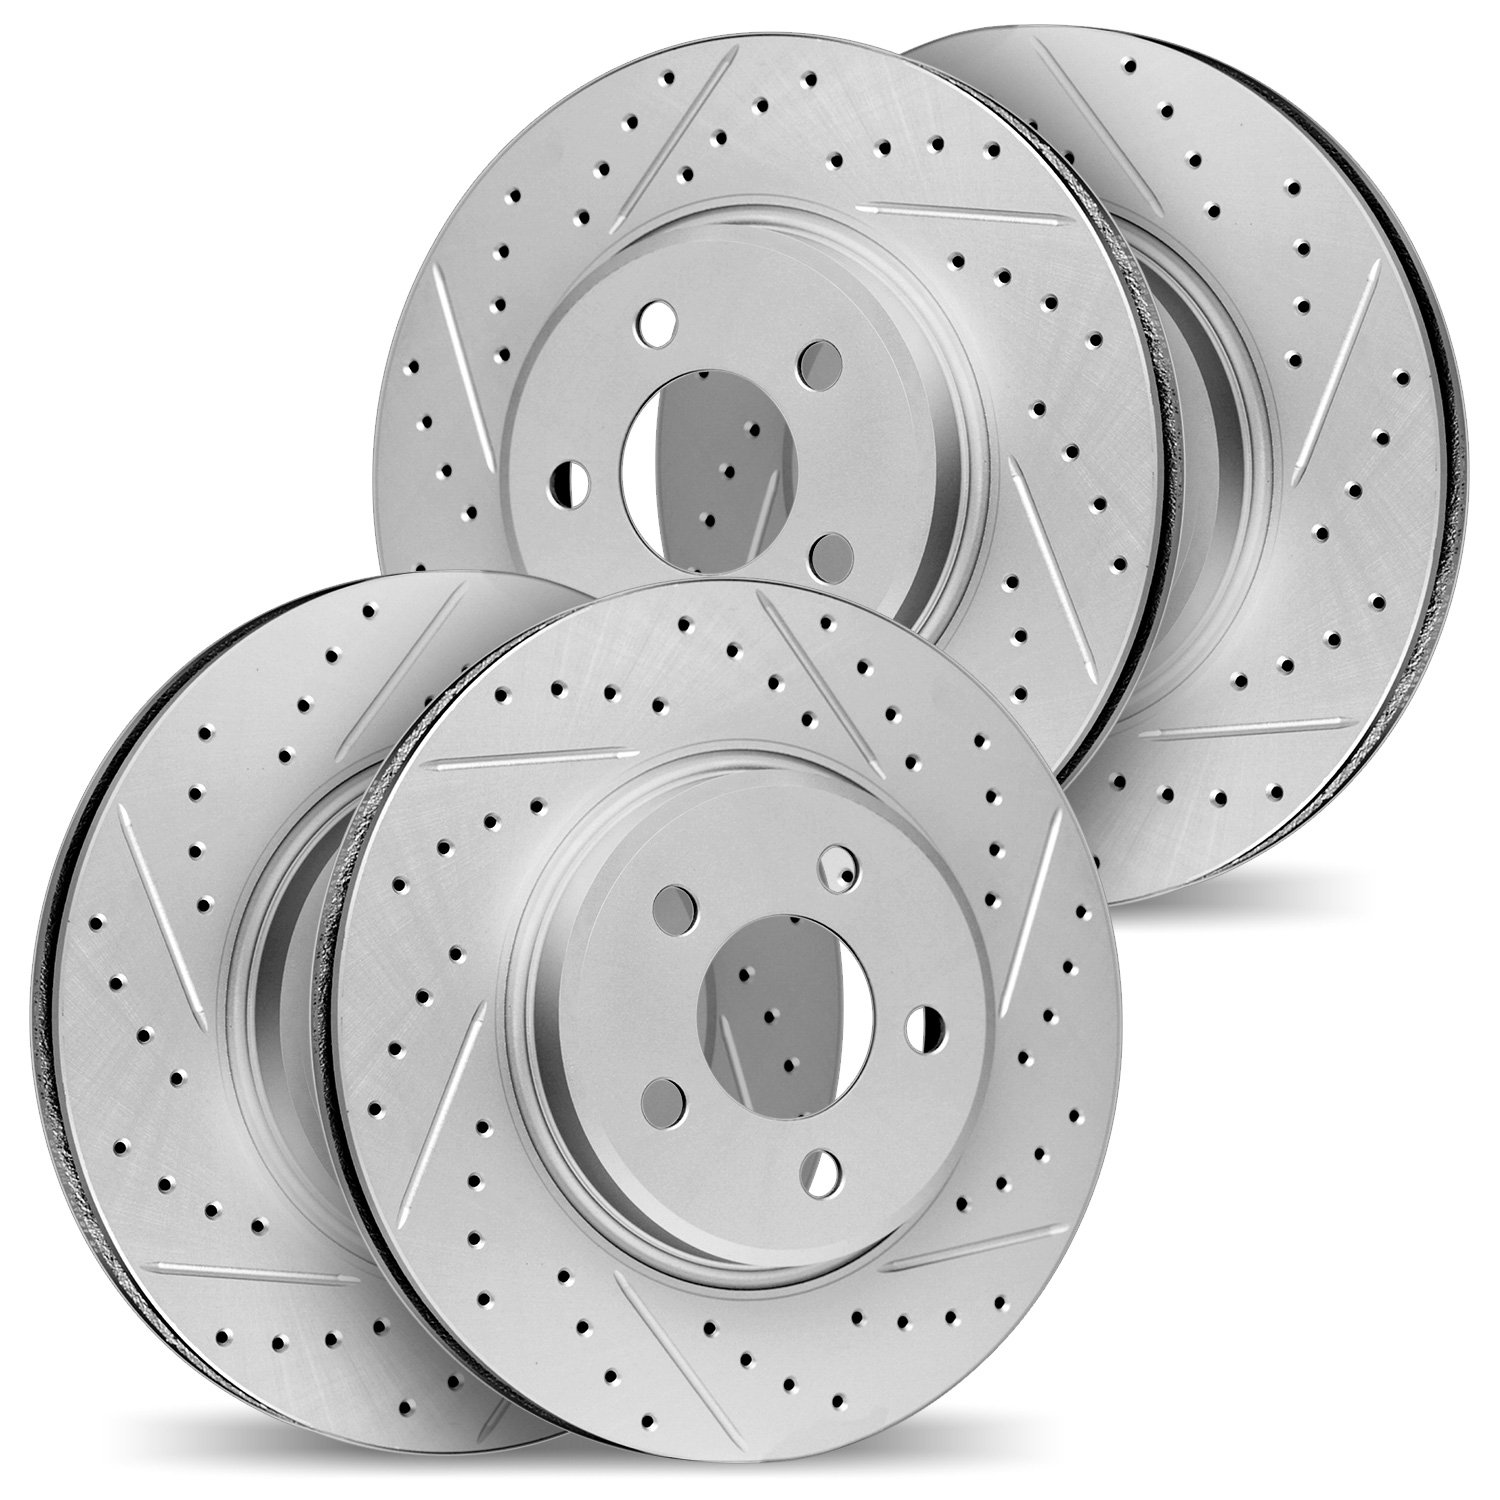 2004-31050 Geoperformance Drilled/Slotted Brake Rotors, 2007-2008 BMW, Position: Front and Rear